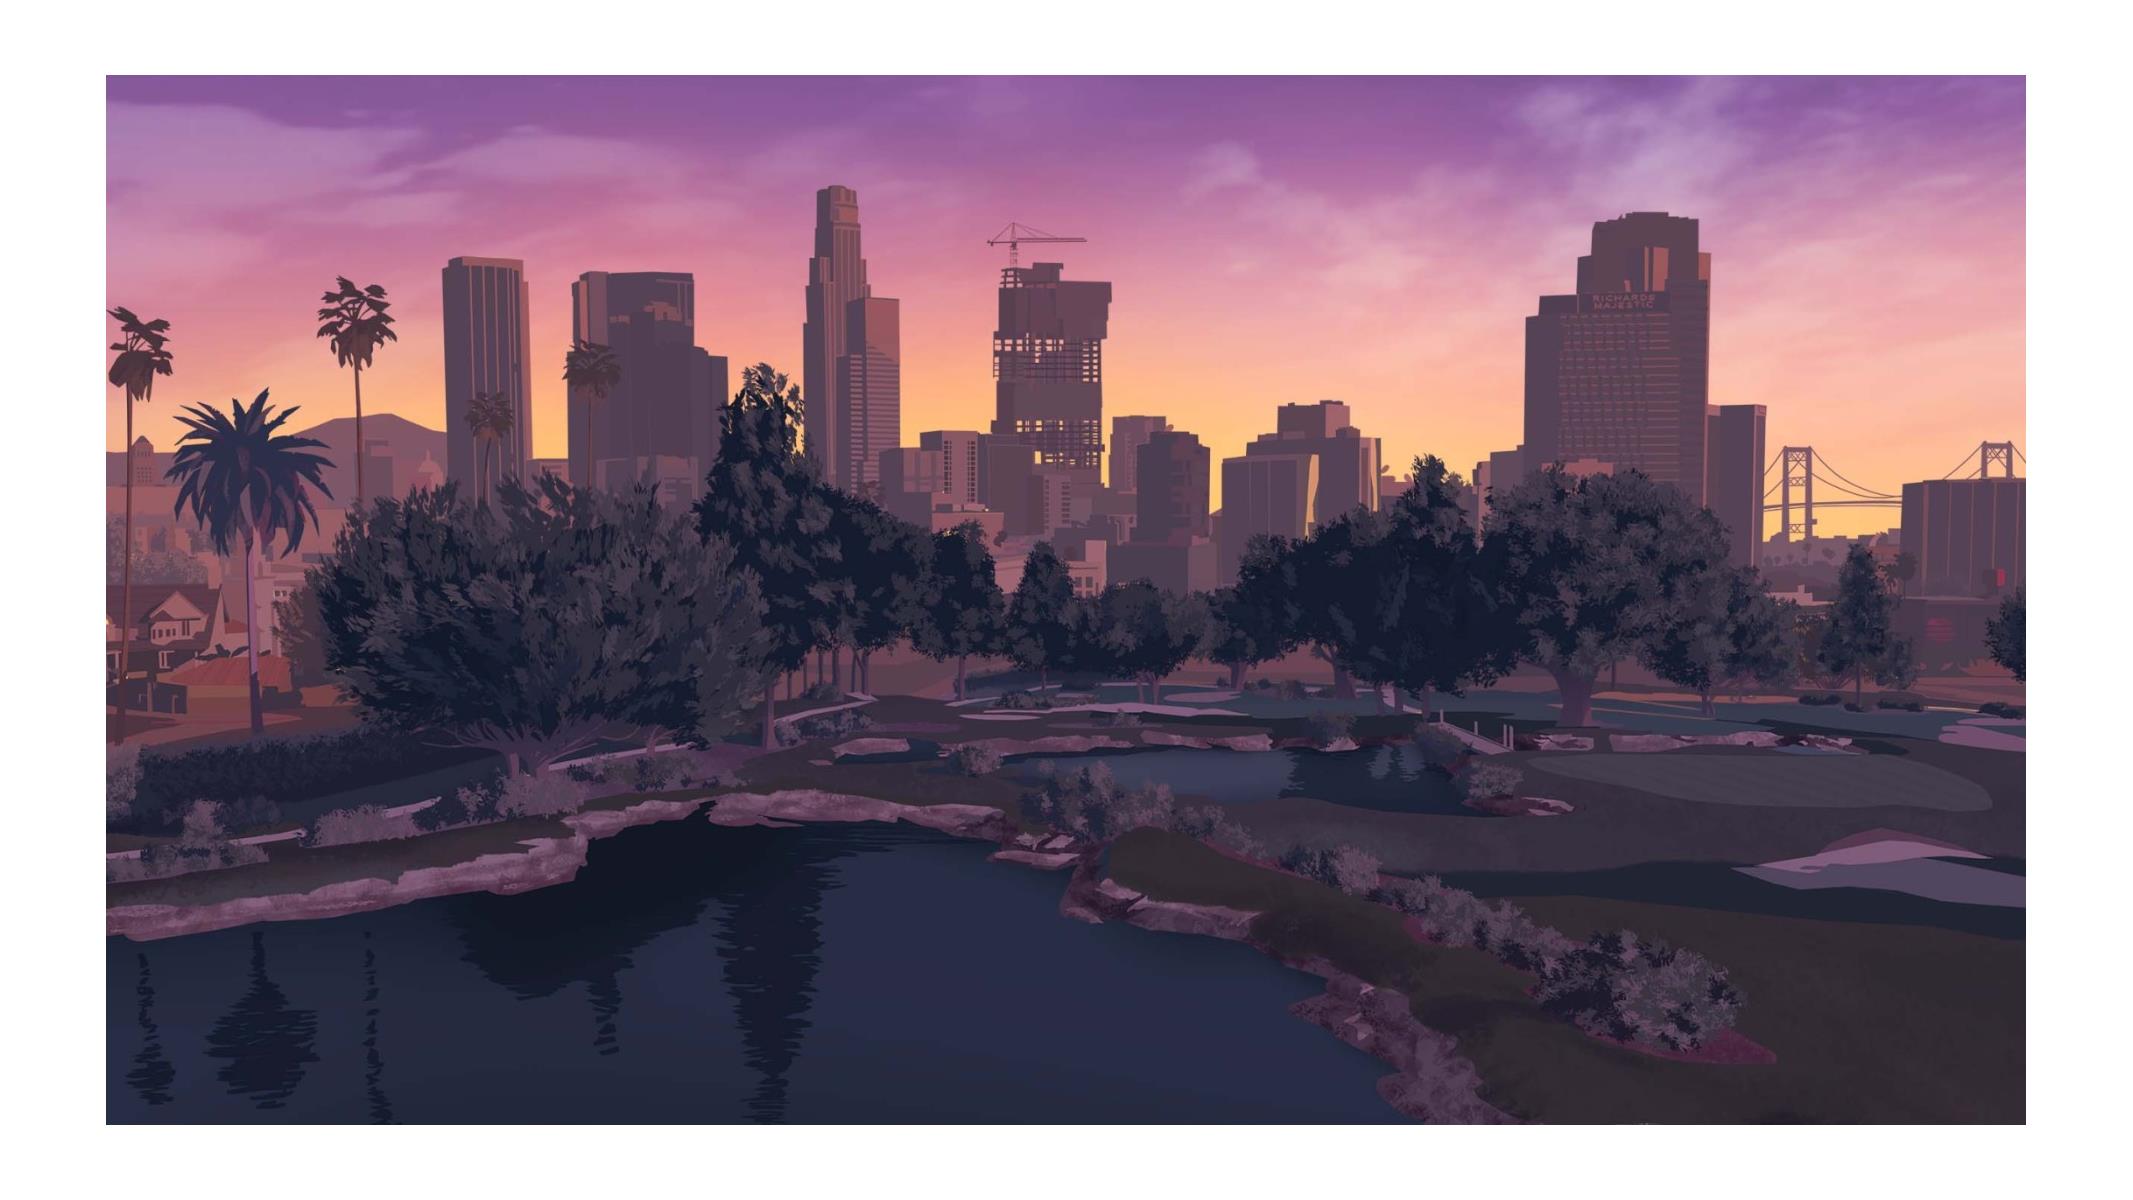 Stream GTA 6 Leaks: How to Download and Watch the Exclusive Footage of Grand  Theft Auto VI Development by Josh